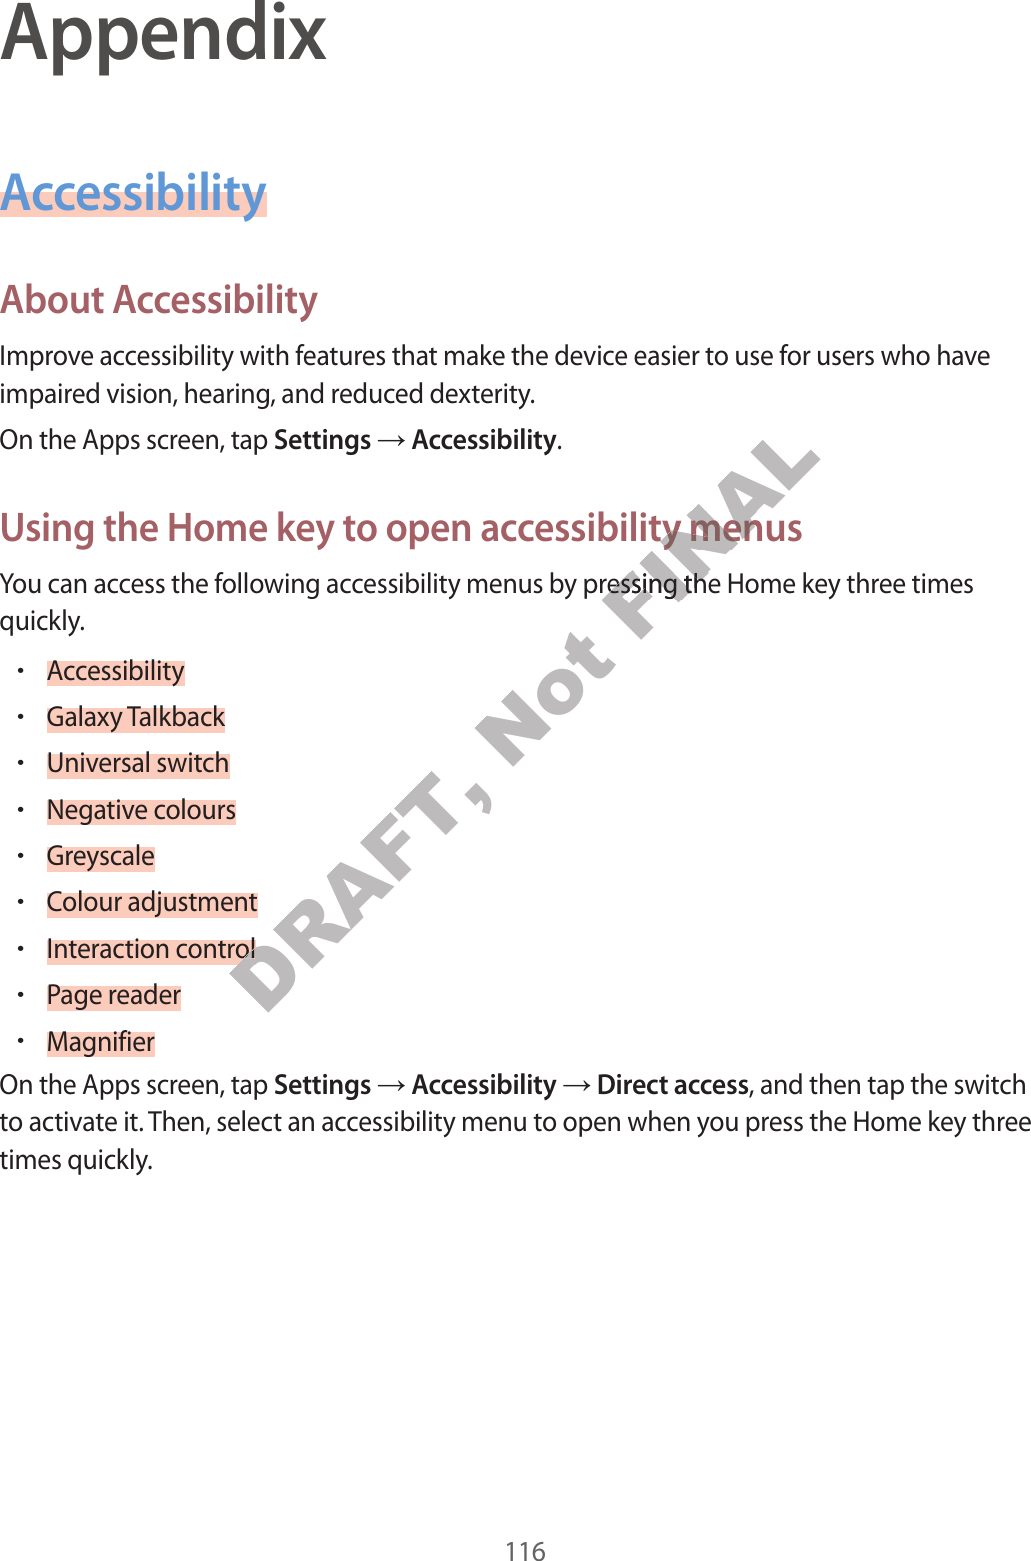 116AppendixAccessibilityAbout AccessibilityImprove accessibility with features that make the device easier to use for users who have impaired vision, hearing, and reduced dexterity.On the Apps screen, tap Settings ĺ Accessibility.Using the Home key to open accessibility menusYou can access the following accessibility menus by pressing the Home key three times quickly.•Accessibility•Galaxy Talkback•Universal switch•Negative colours•Greyscale•Colour adjustment•Interaction control•Page reader•MagnifierOn the Apps screen, tap Settings ĺ Accessibility ĺ Direct access, and then tap the switch to activate it. Then, select an accessibility menu to open when you press the Home key three times quickly.DRAFT, DRAFT, DRAFT, Interaction controltroltrolNot FINALessibility menusessibility menusy pressing the Home key thry pressing the Home key thr